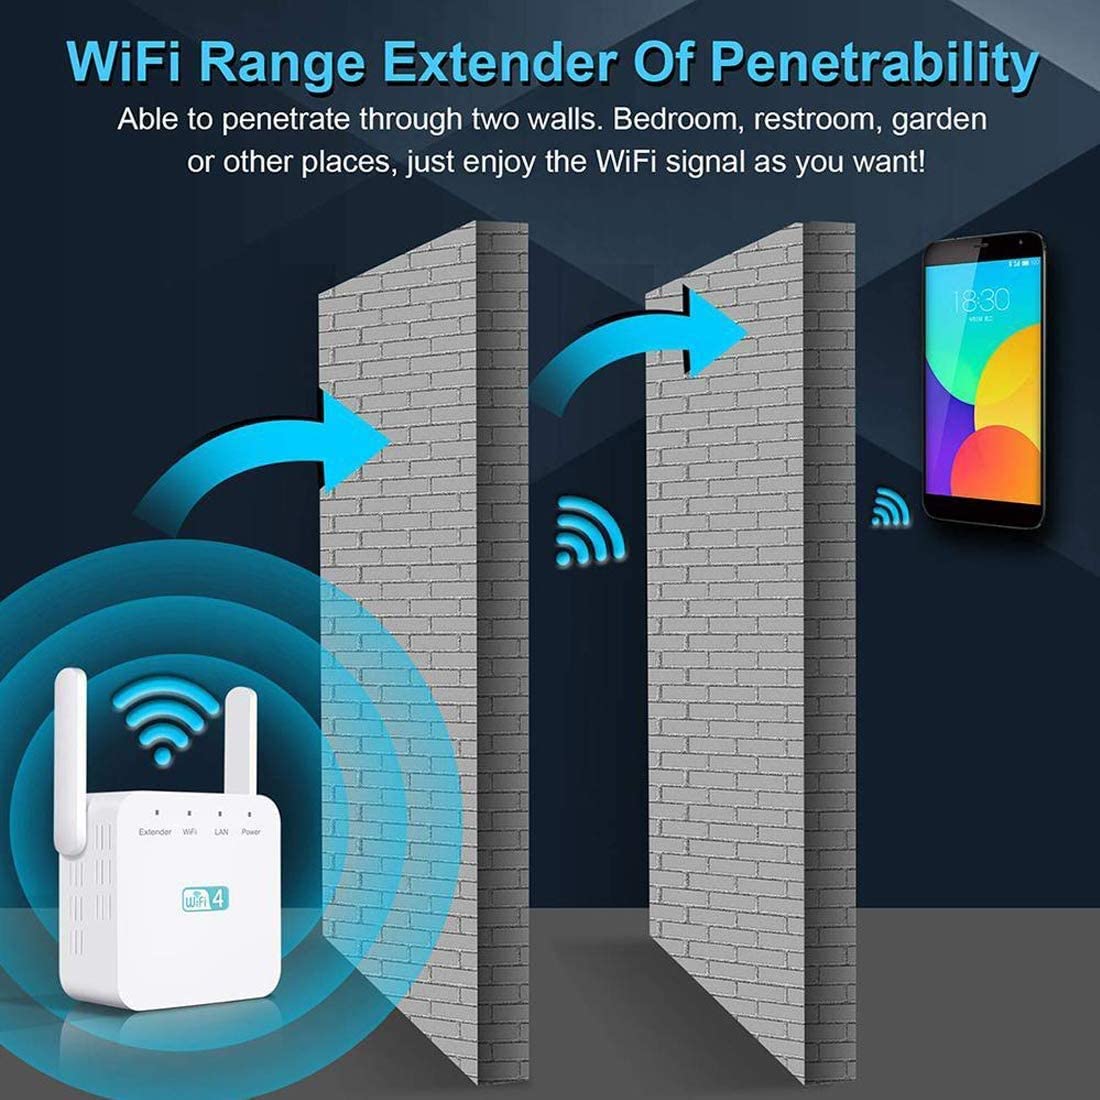 EDUPUP WiFi Extender, WiFi Range Booster, Wireless Range Extender with 2 External Antenna, LAN Port, 300Mbps 2.4GHz WiFi Repeater Booster Compatible with All Routers WP Smart Home